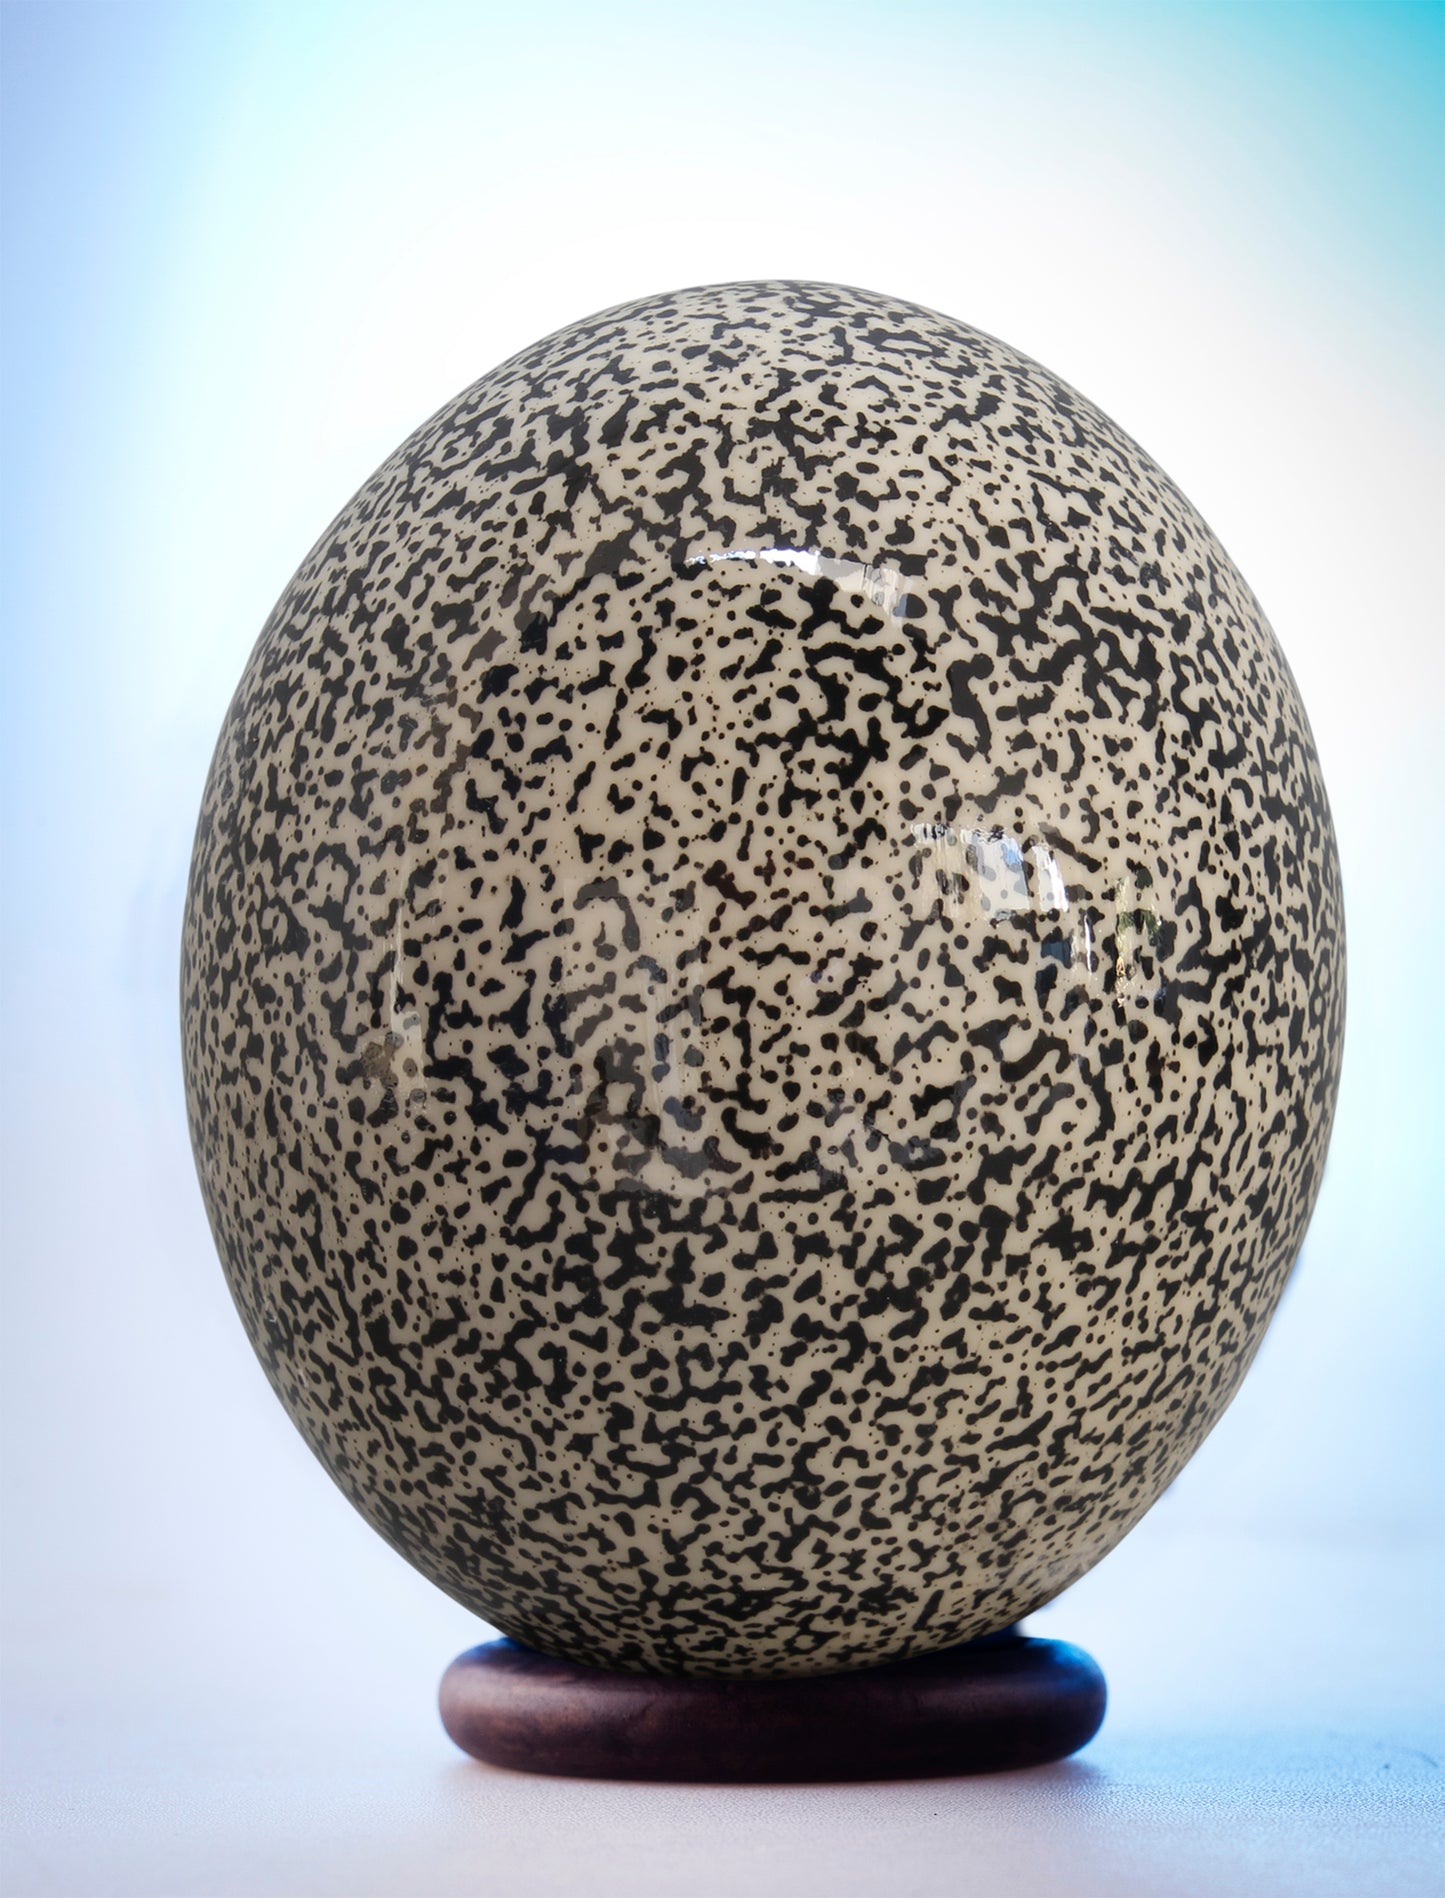 Speckled cream and black ostrich egg